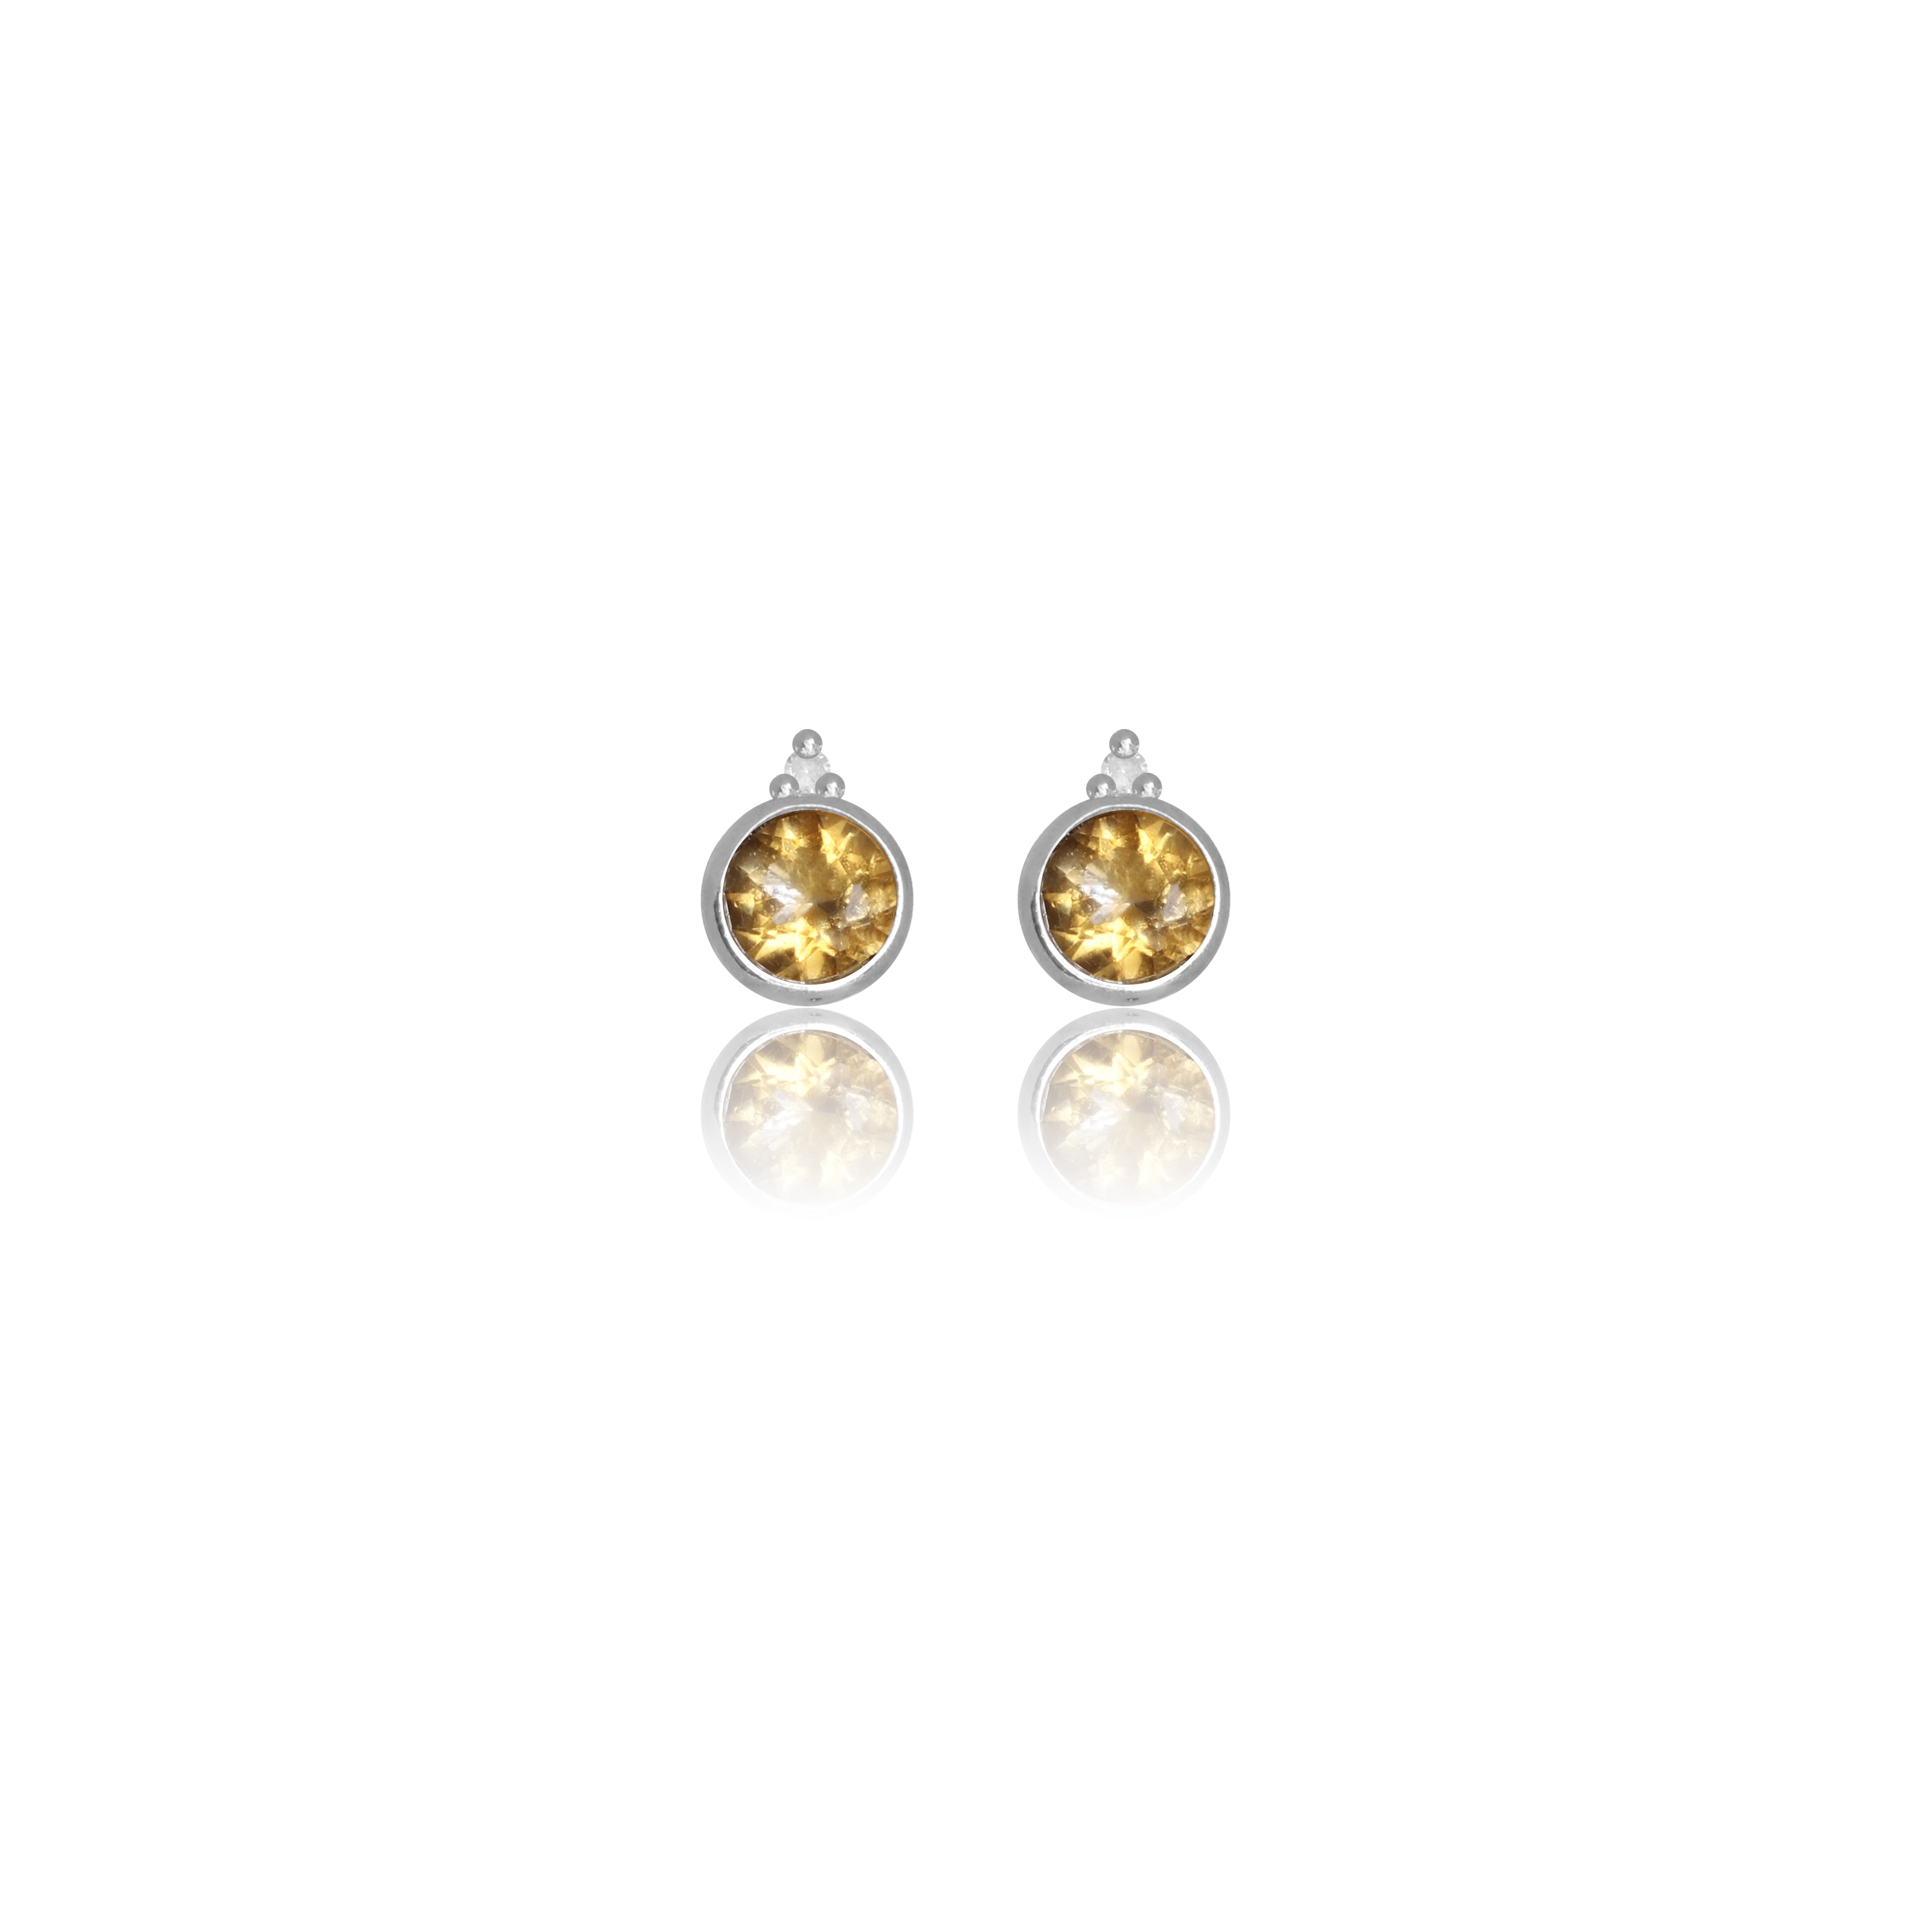 DIAMONDS BY GEORGINI NATURAL CITRINE AND TWO NATURAL DIAMOND NOVEMBER EARRINGS SILVER